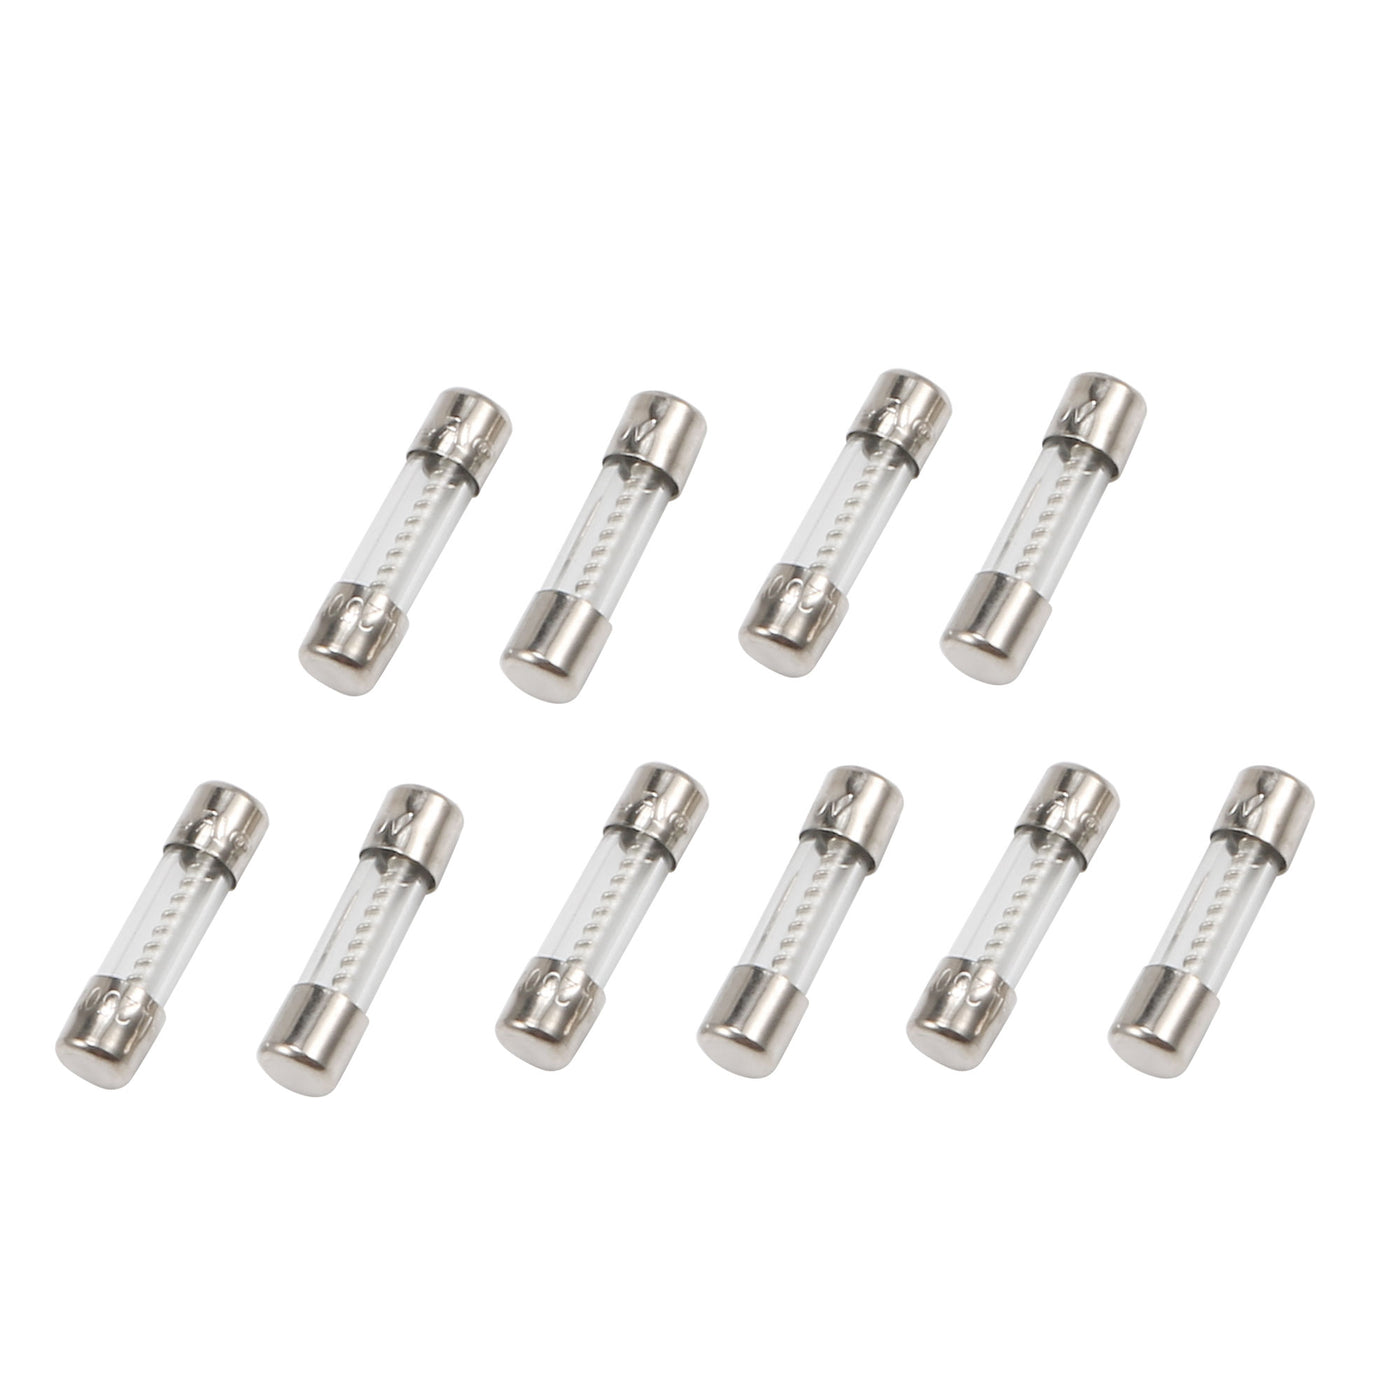 uxcell Uxcell 10 Pcs 250V 10Amp Slow Blow Time Delay Glass Fuses Tubes 5mm x 20mm